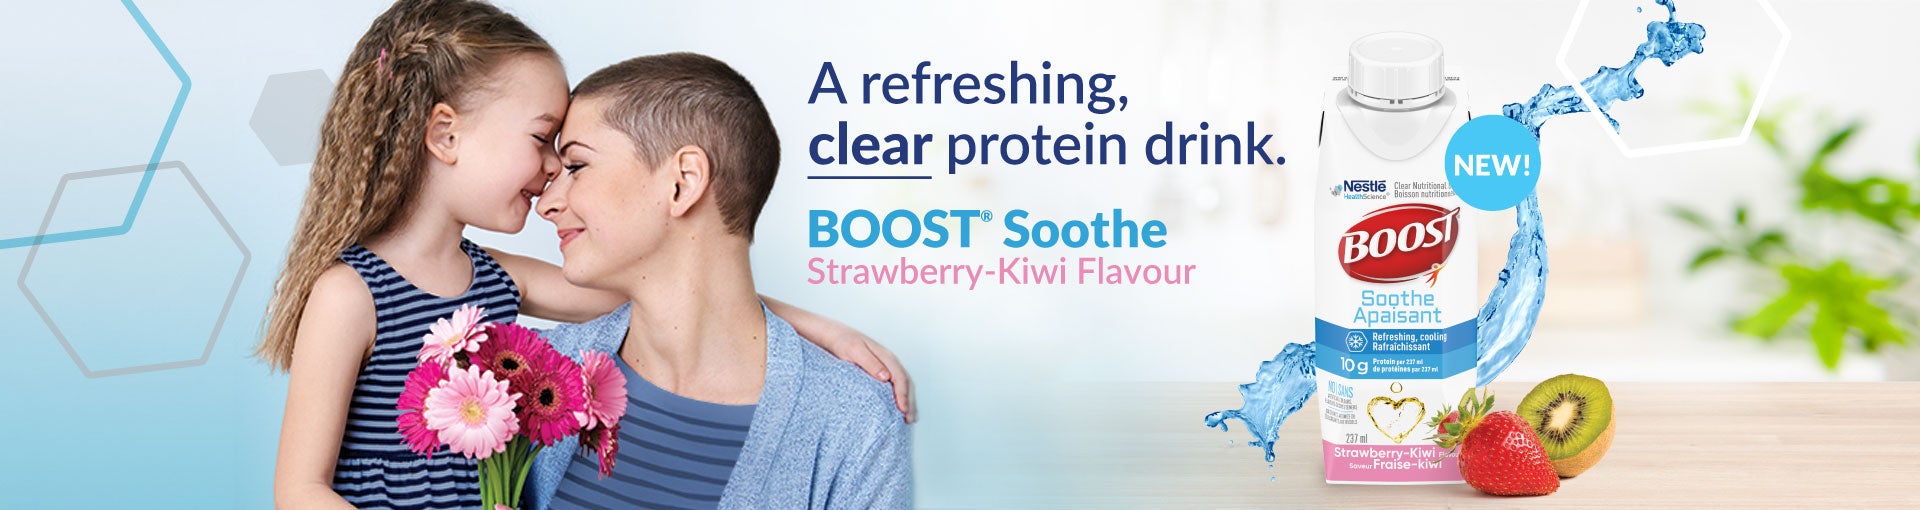 INTRODUCING BOOST SOOTHE STRAWBERRY-KIWI